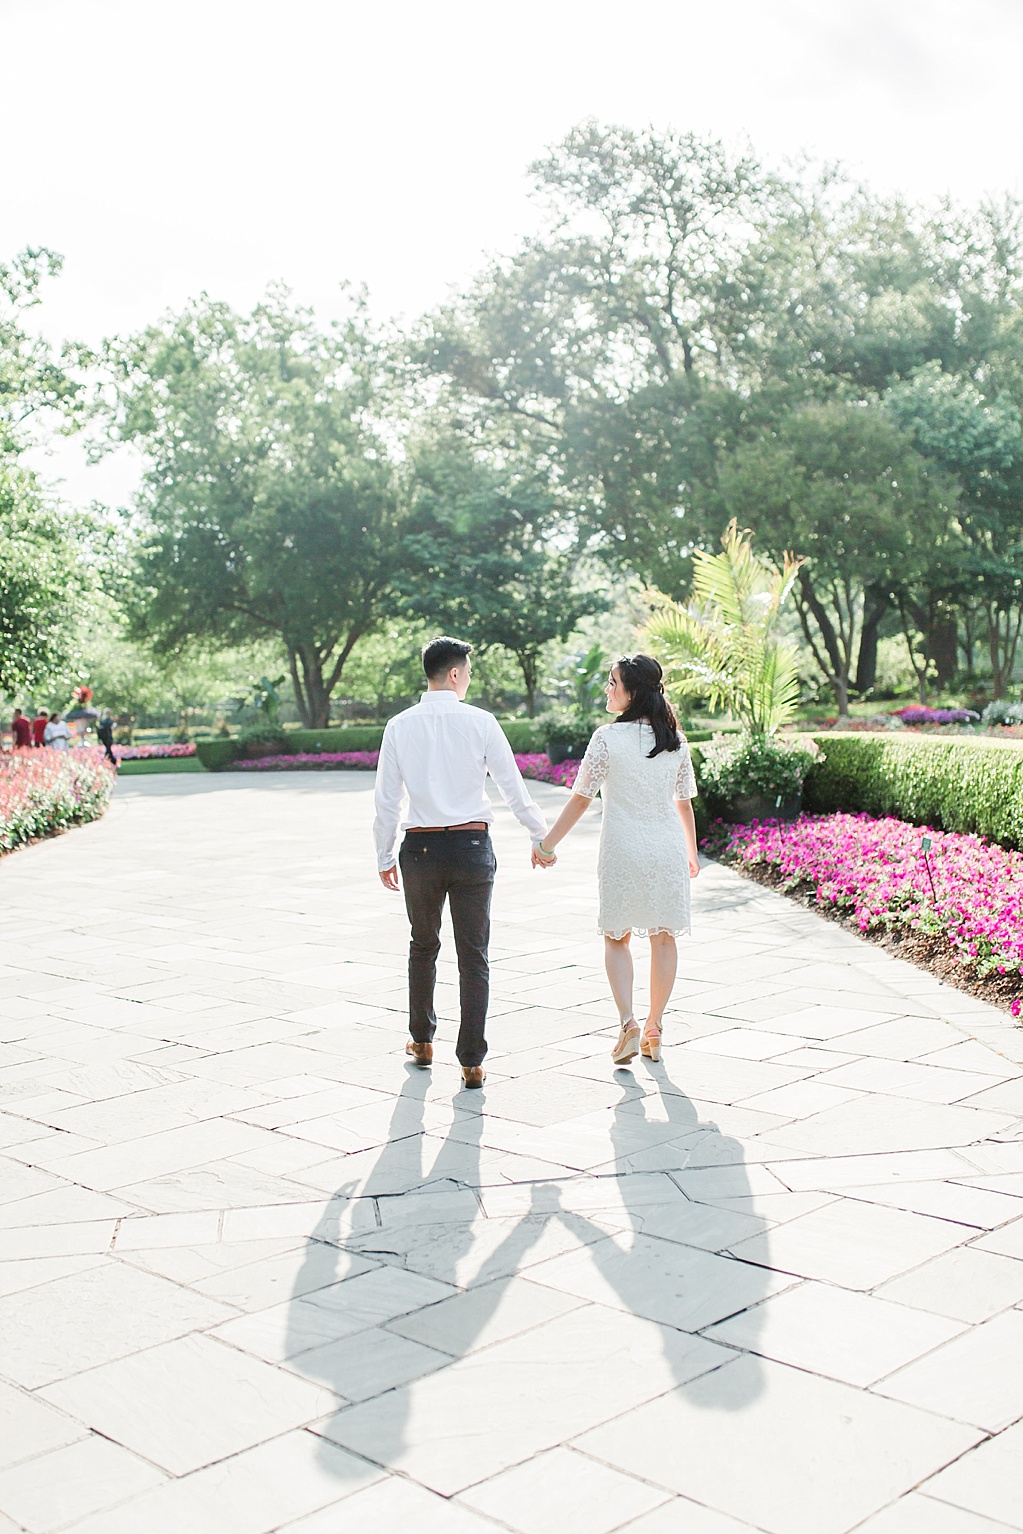 An Elegant Spring Engagement Session at the Dallas Arboretum and Botanical Gardens by Allison Jeffers Wedding Photography 0002